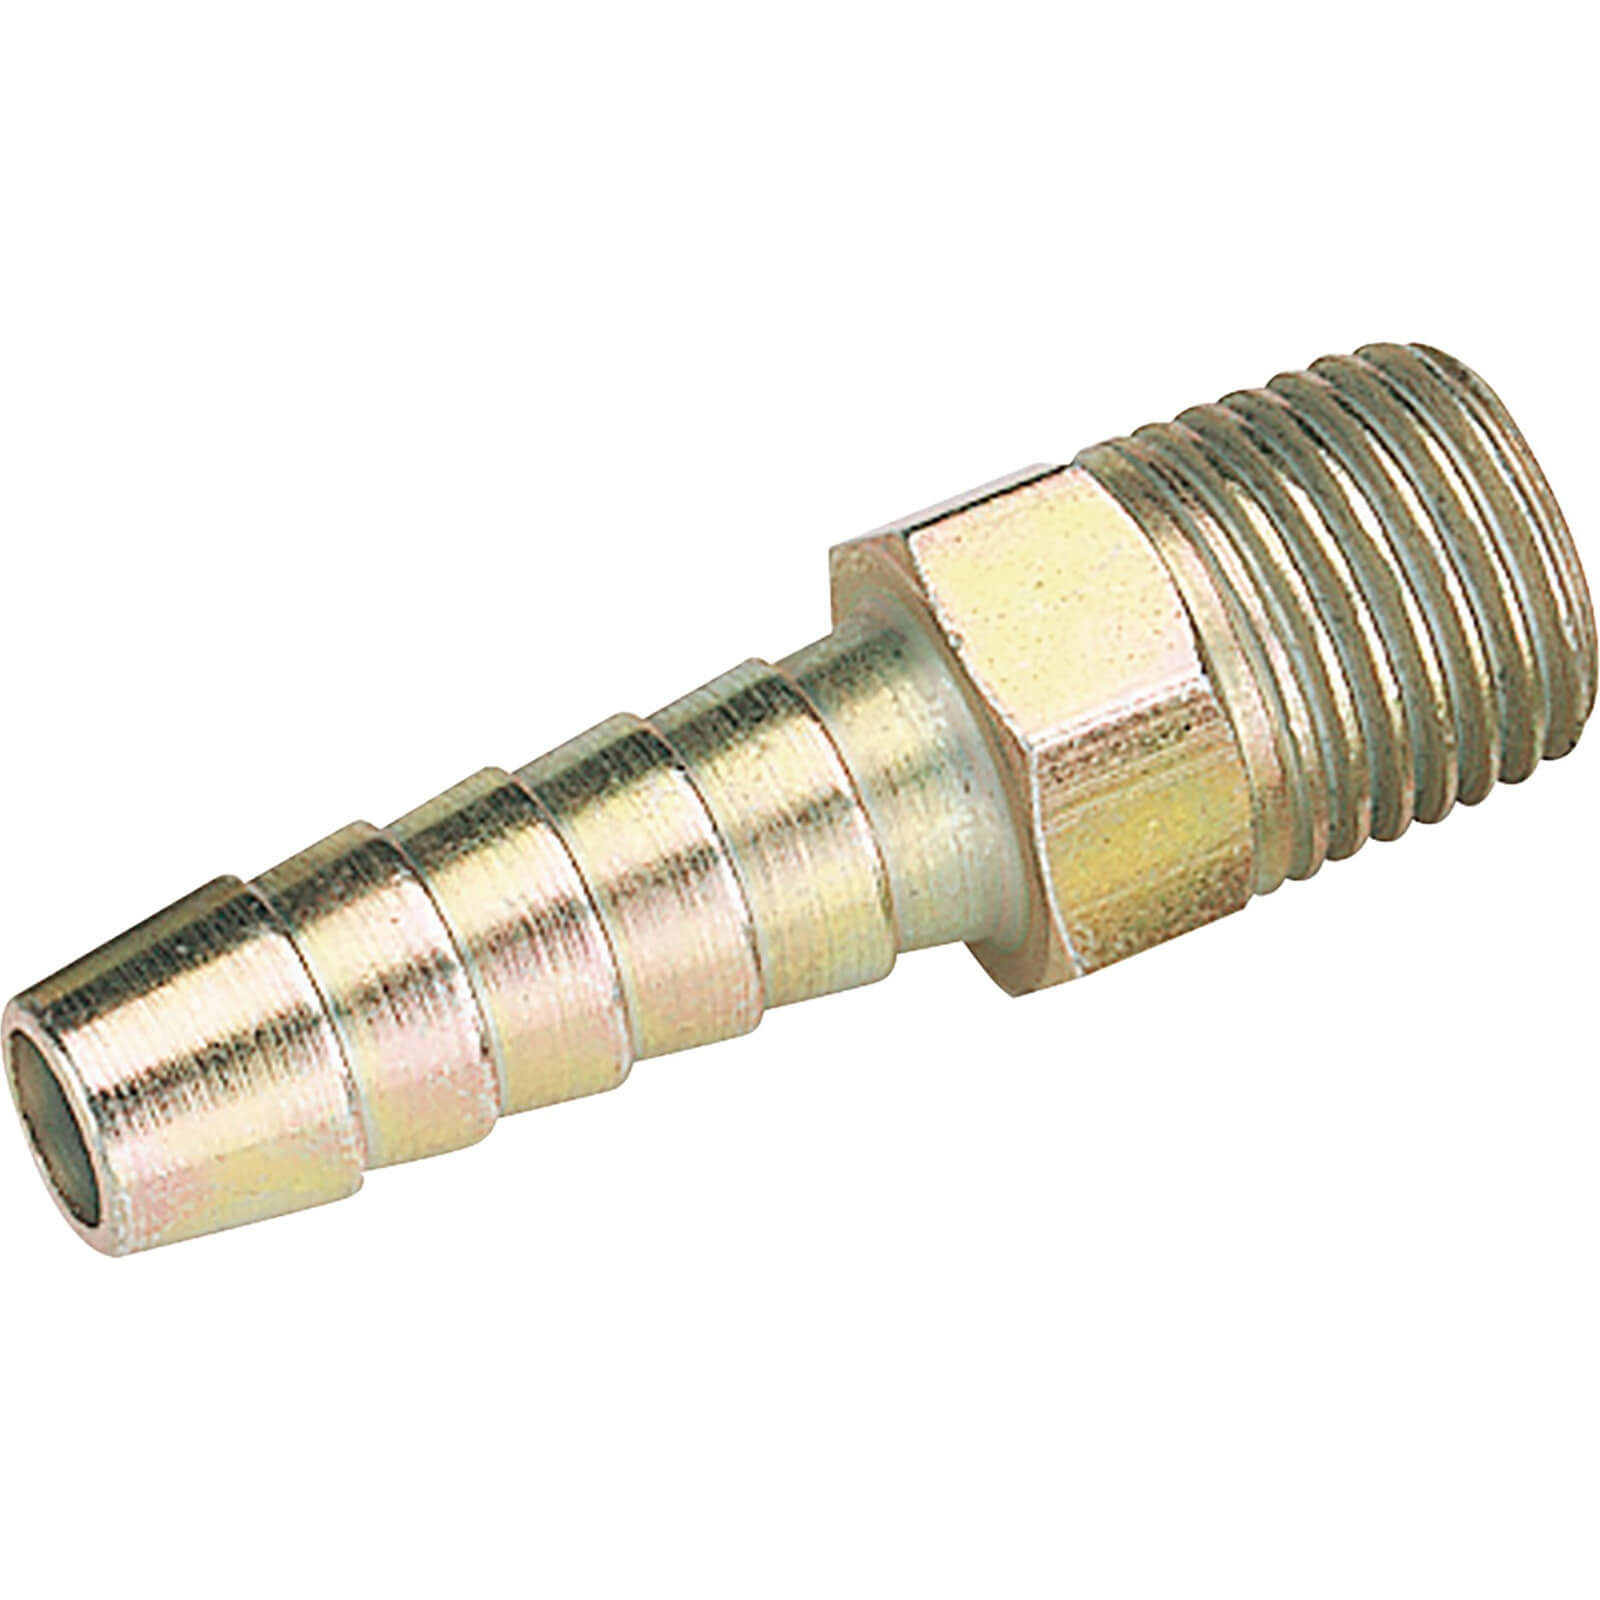 Image of Draper PCL Tailpiece Air Line Fitting BSPT Male Thread 1/4" BSP 5/16" Pack of 1